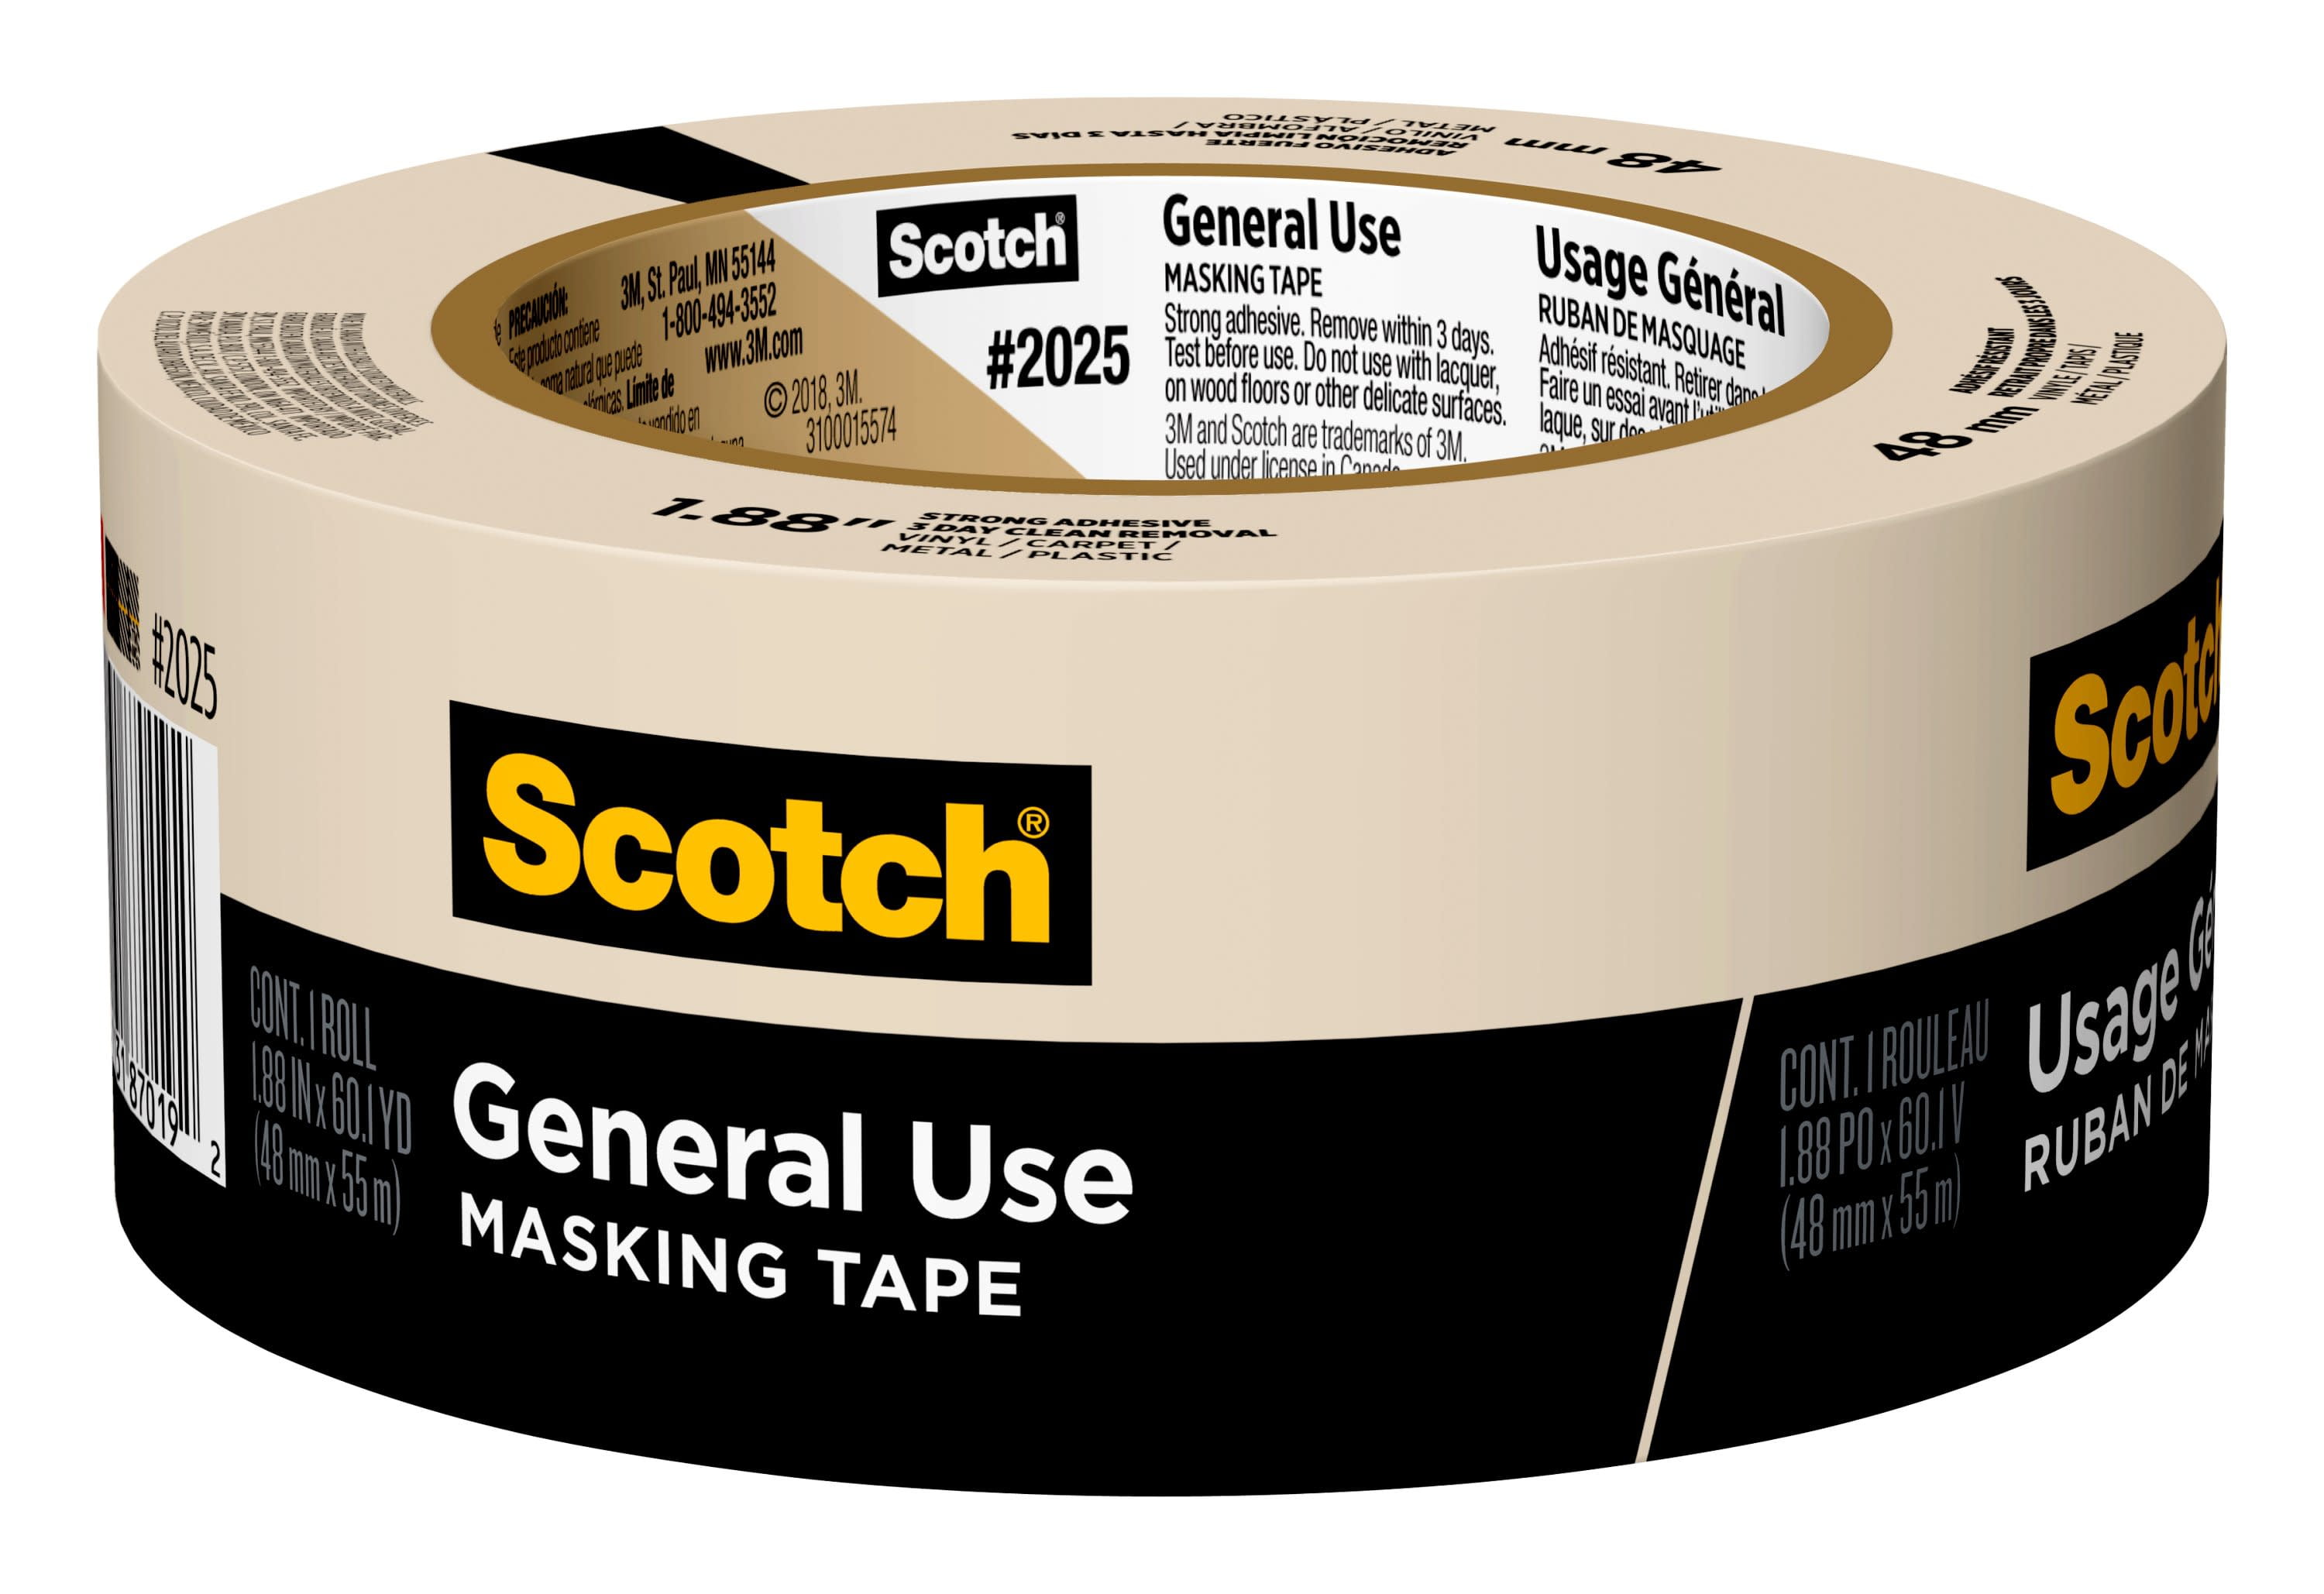 Masking Tape General Purpose Masking Tape 55 Yards Painting Tape for  Painting Home Office School Stationery Arts Crafts Basic Use (45 Rolls, 1  Inch)